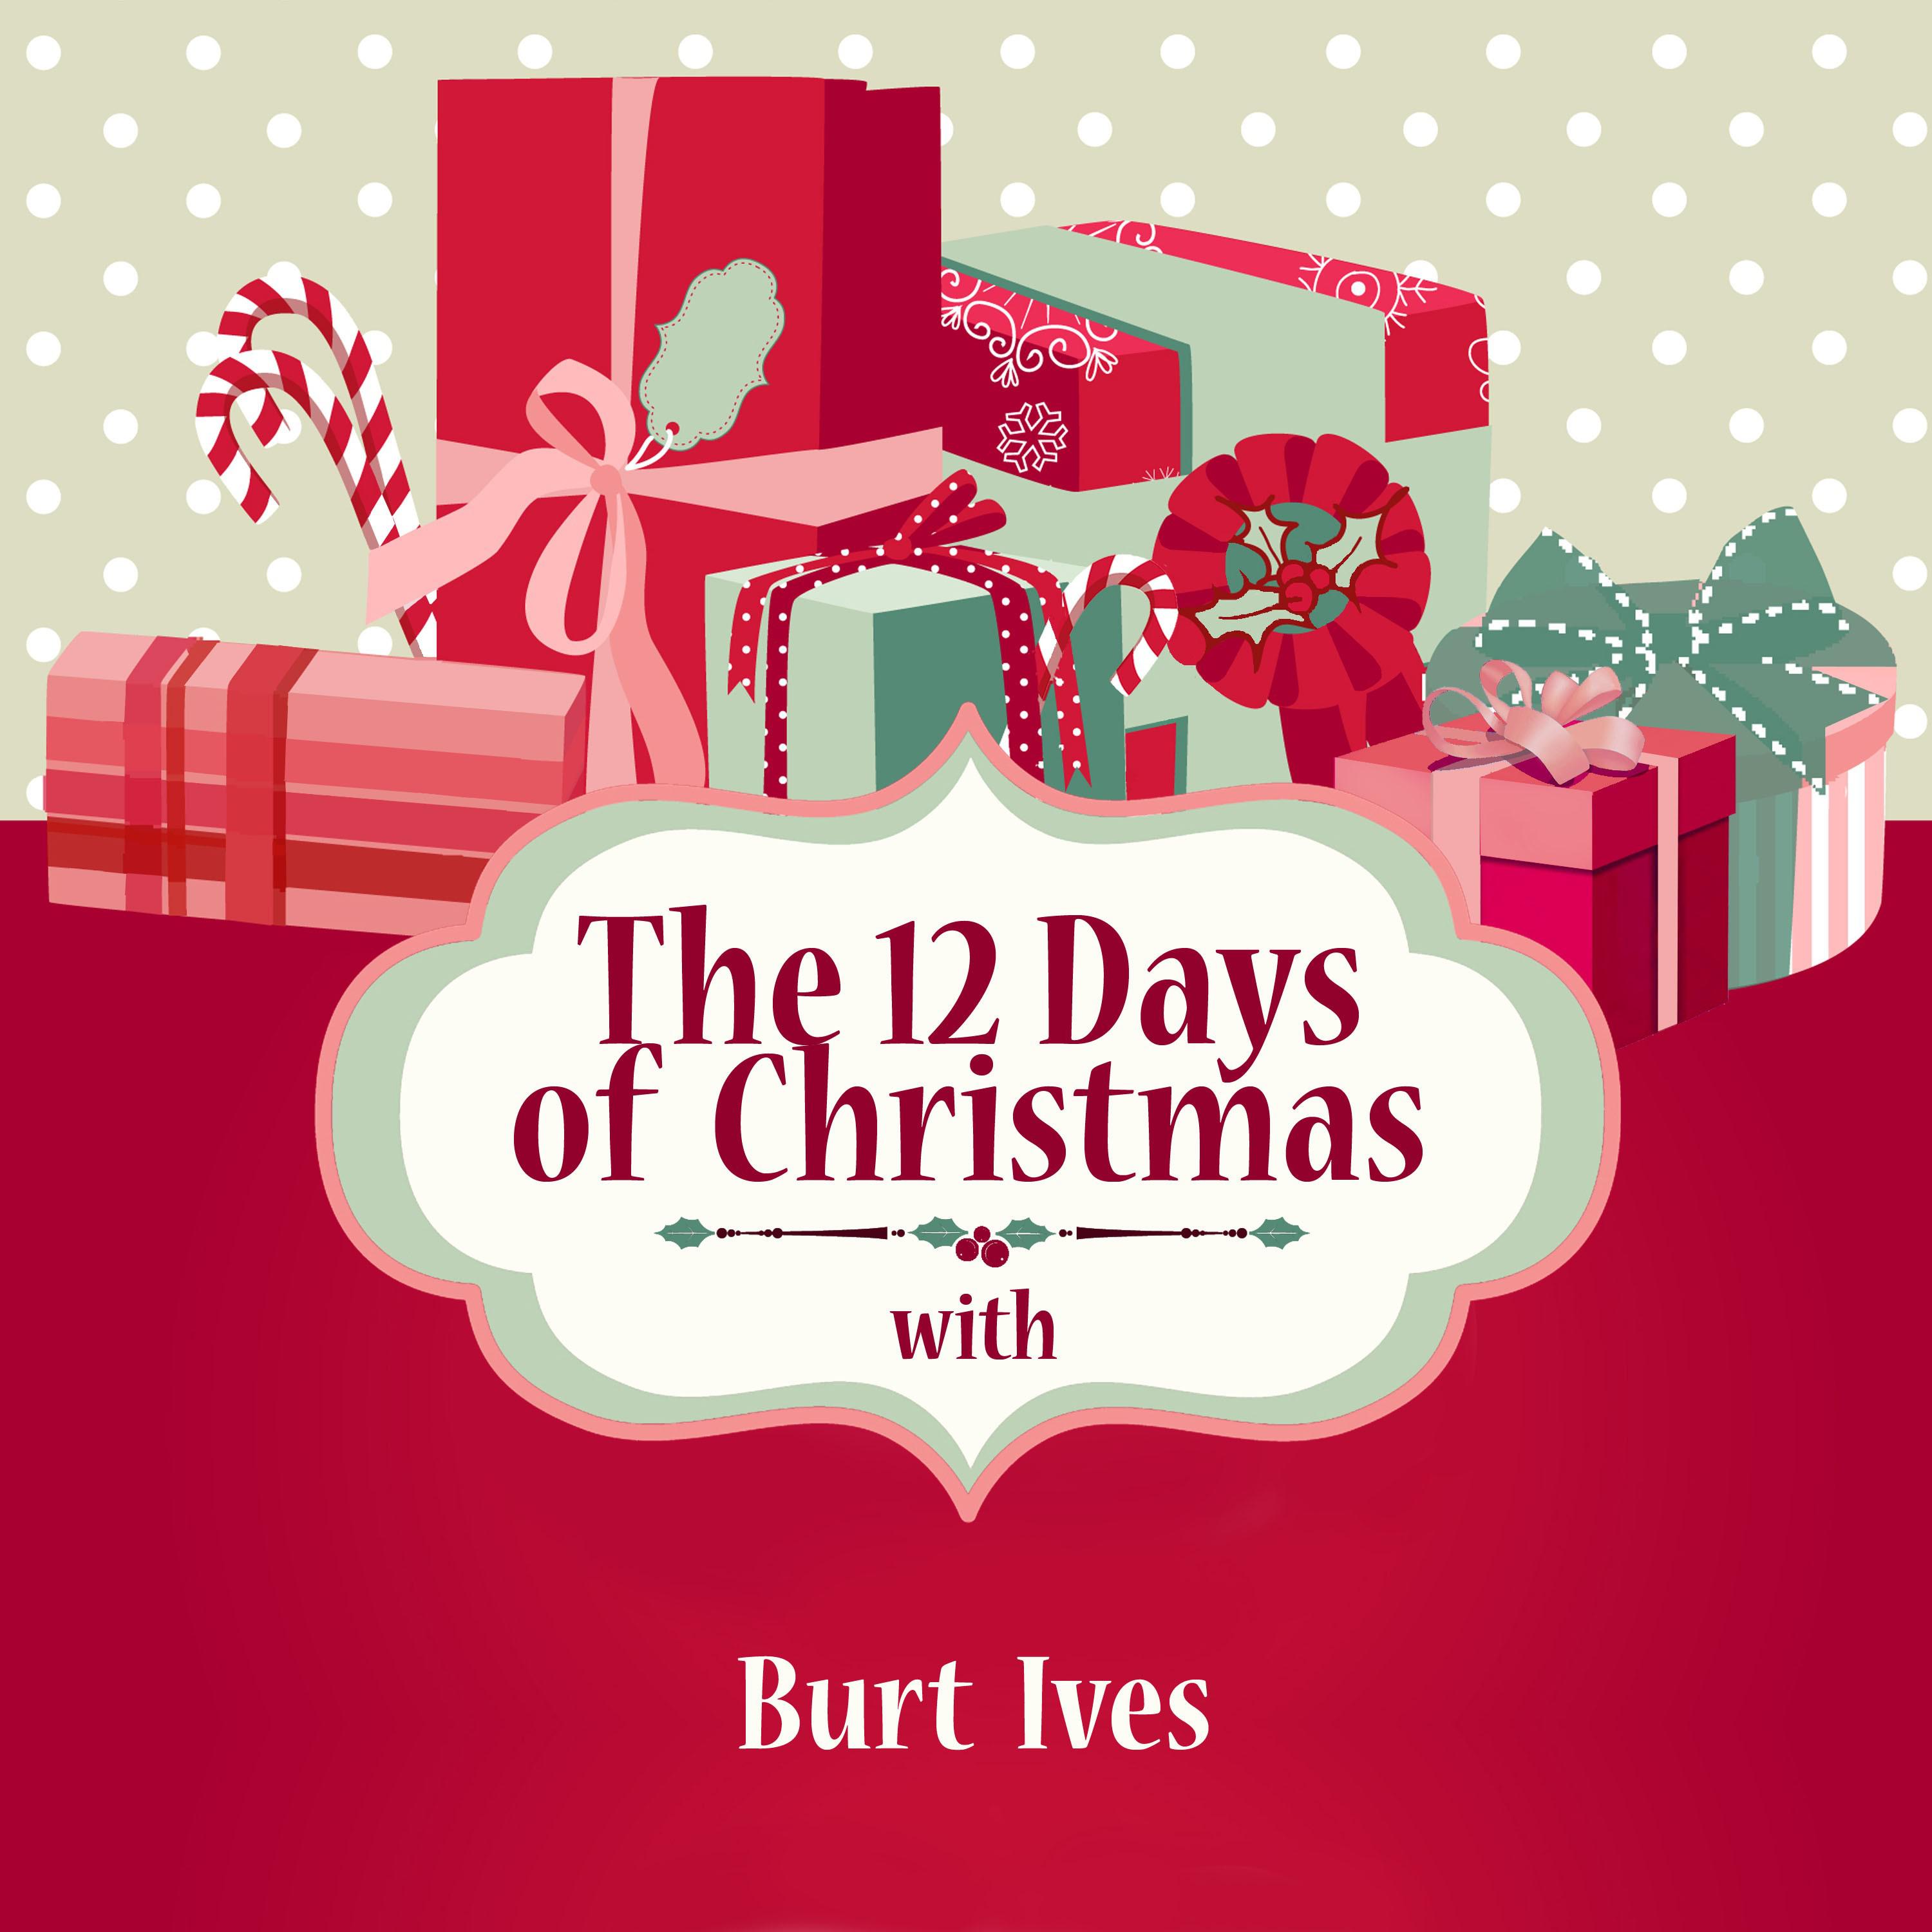 The 12 Days of Christmas with Burt Ives